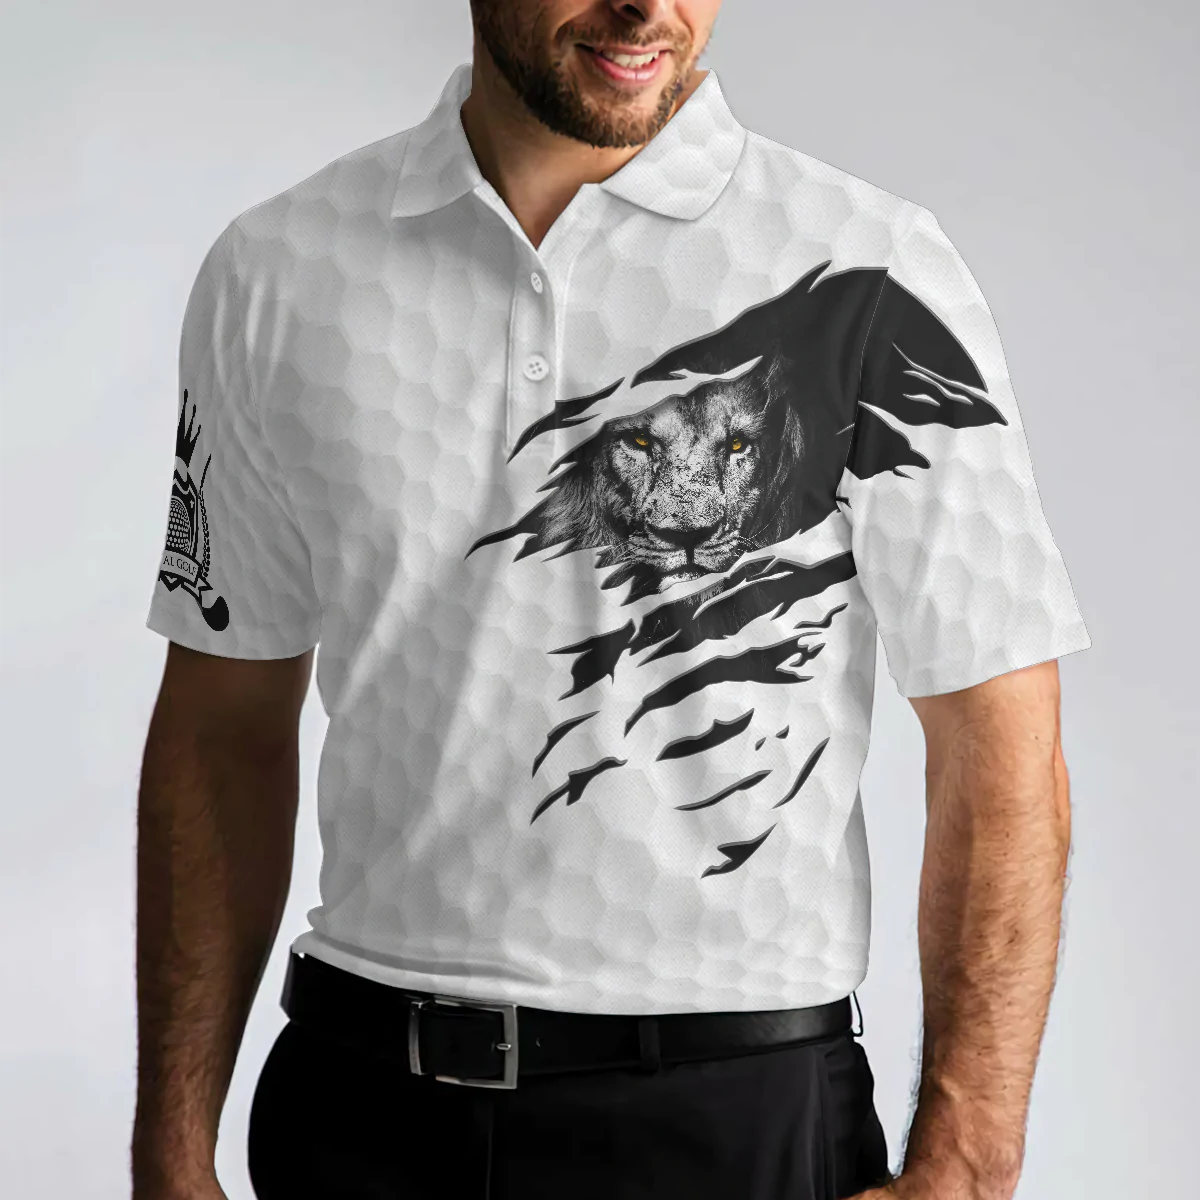 Live Like A King Playing Golf Black And Gold Polo Shirt, Luxury